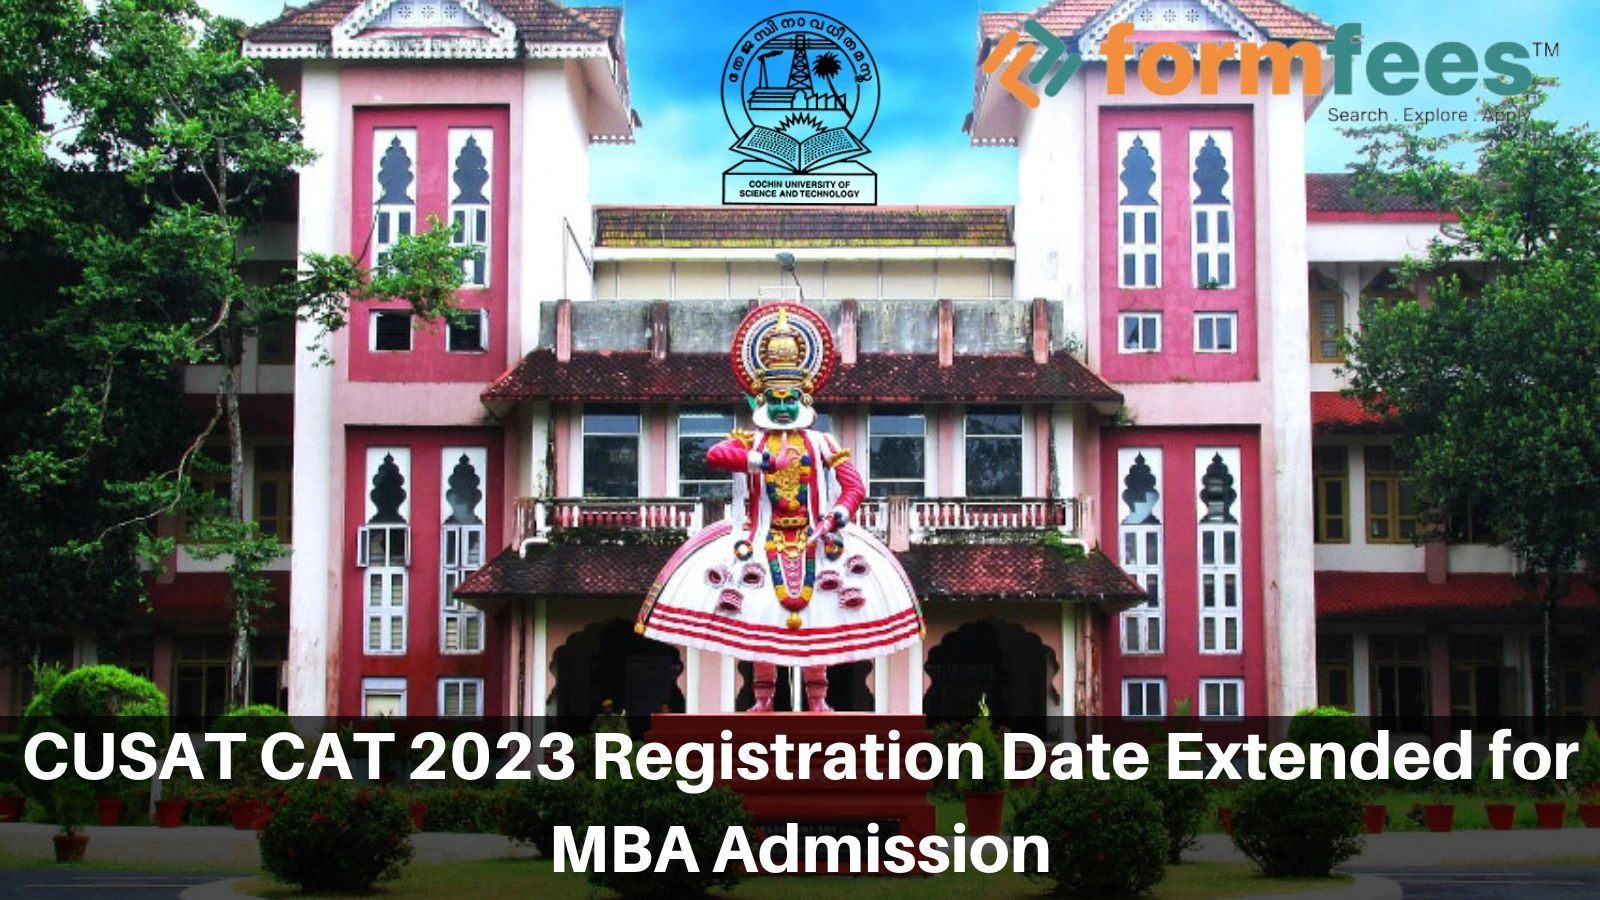 CUSAT CAT 2023 Registration Date Extended for MBA Admission